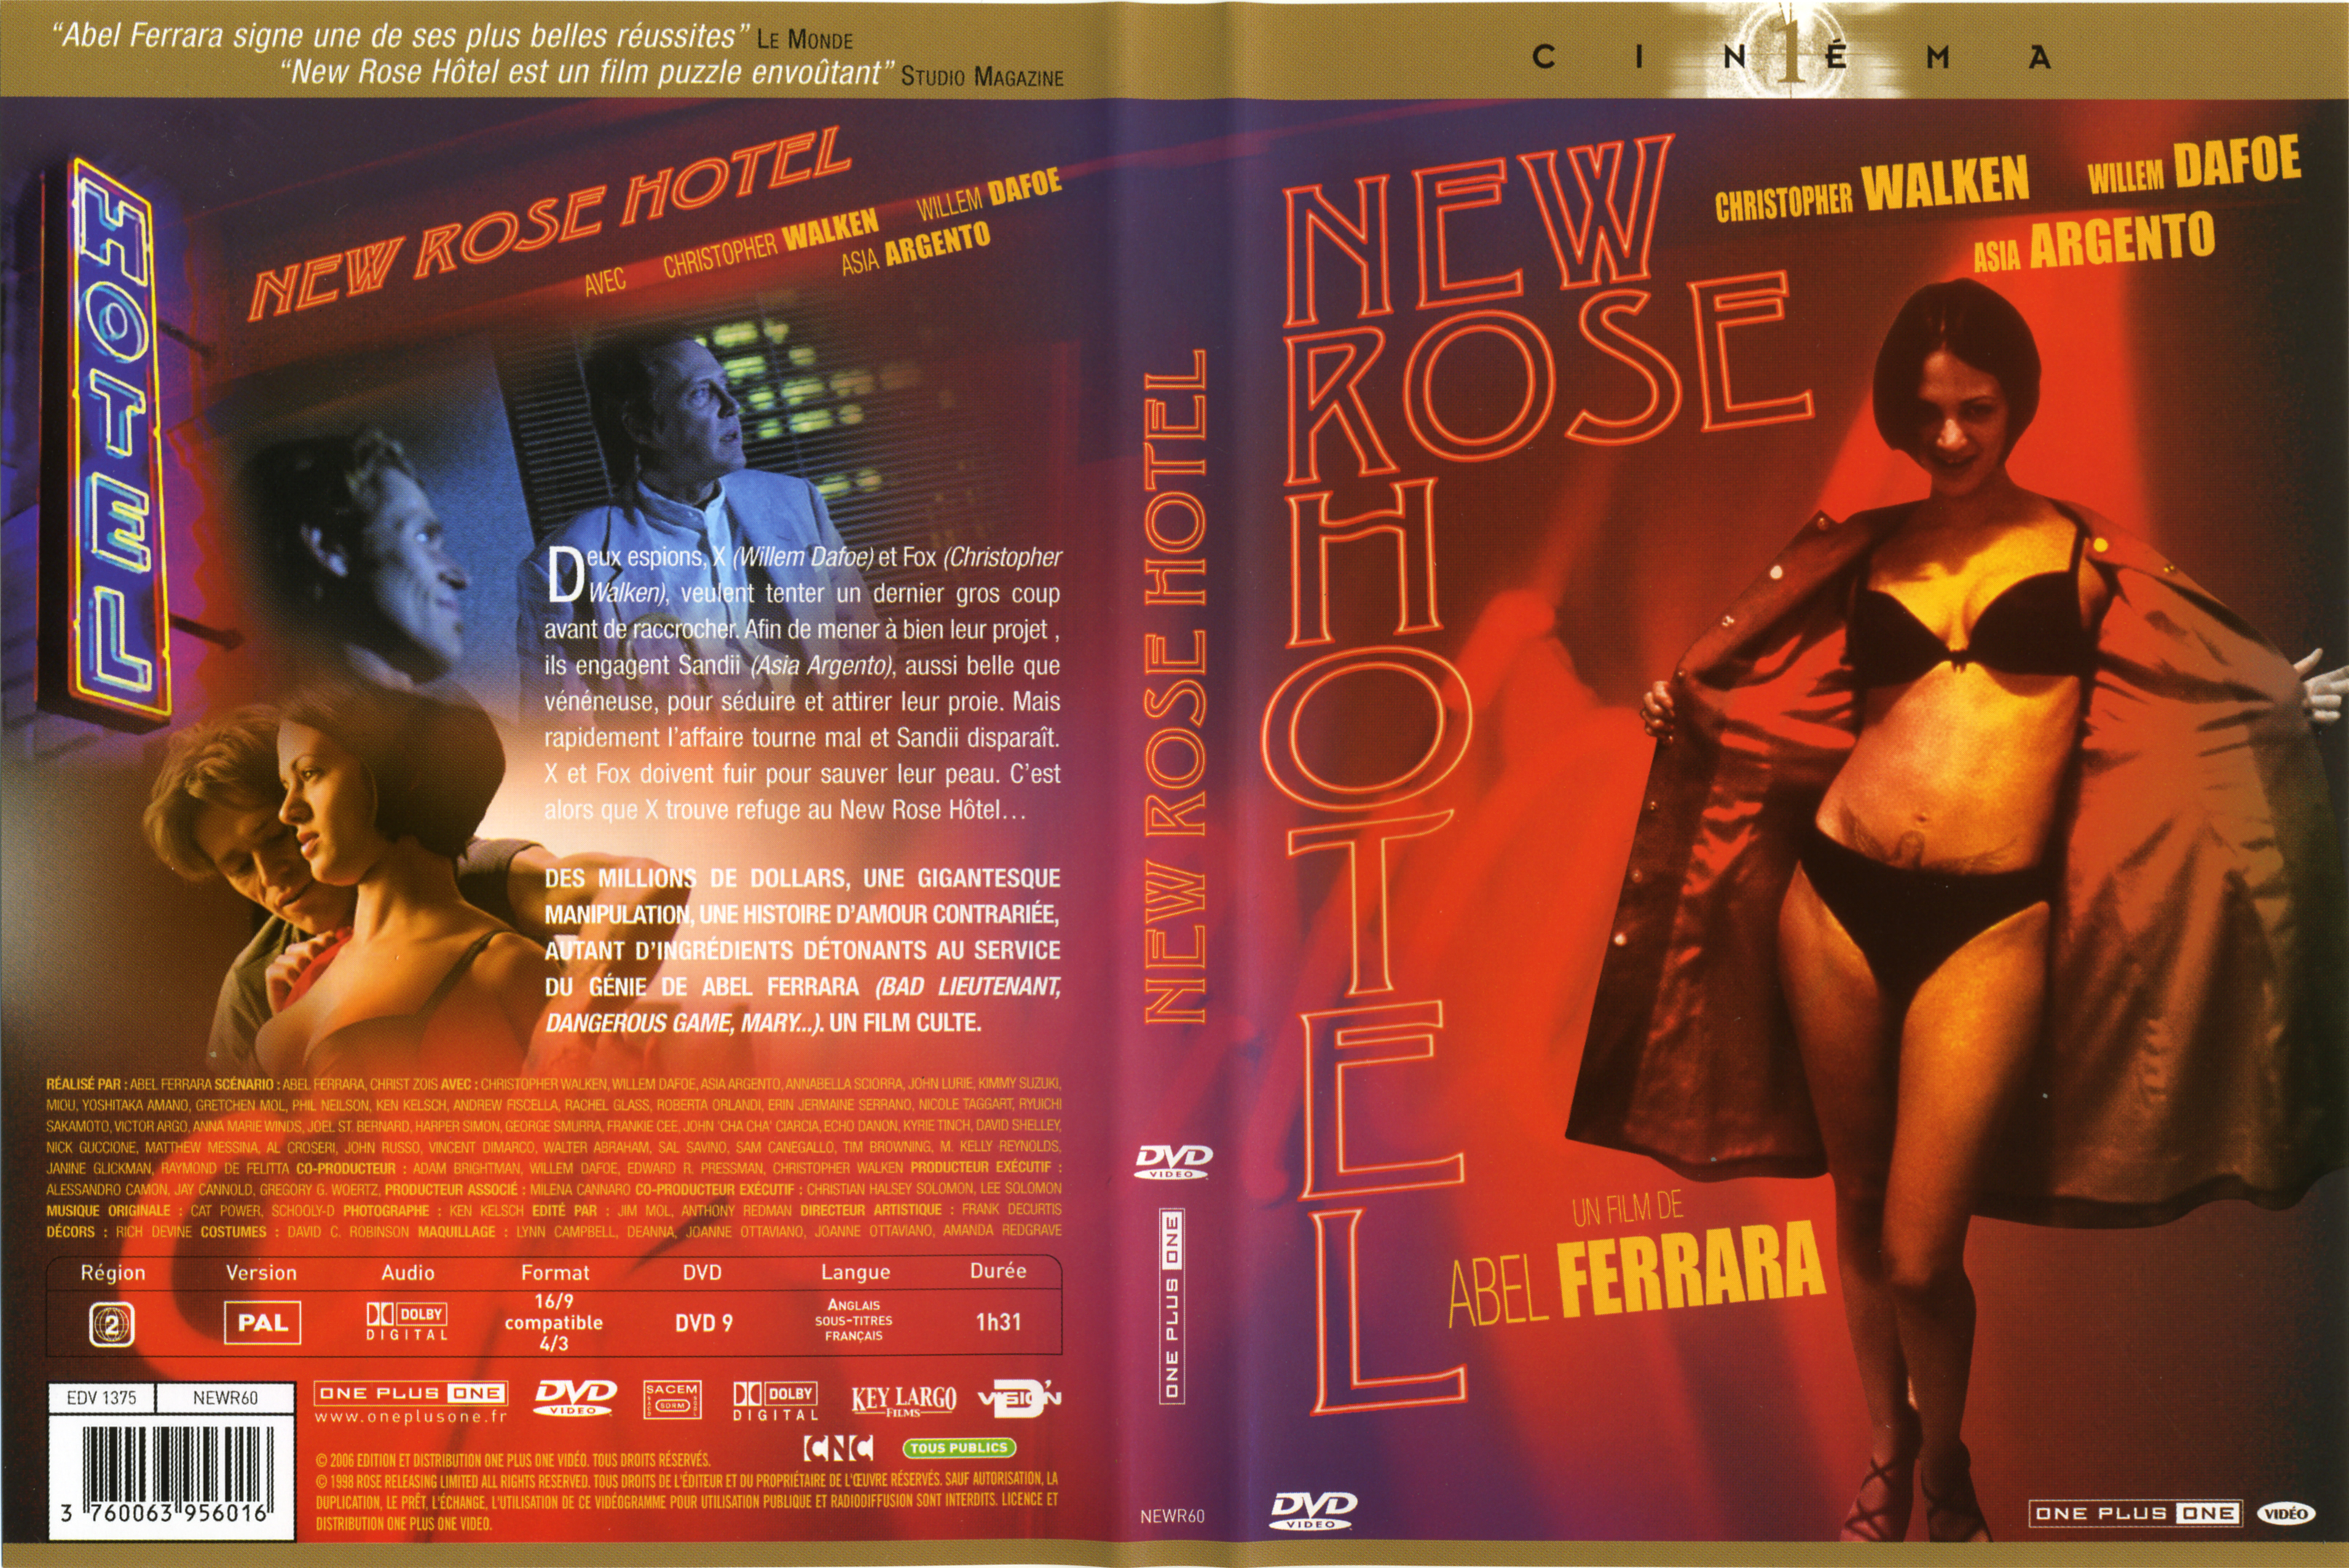 Jaquette DVD New rose hotel